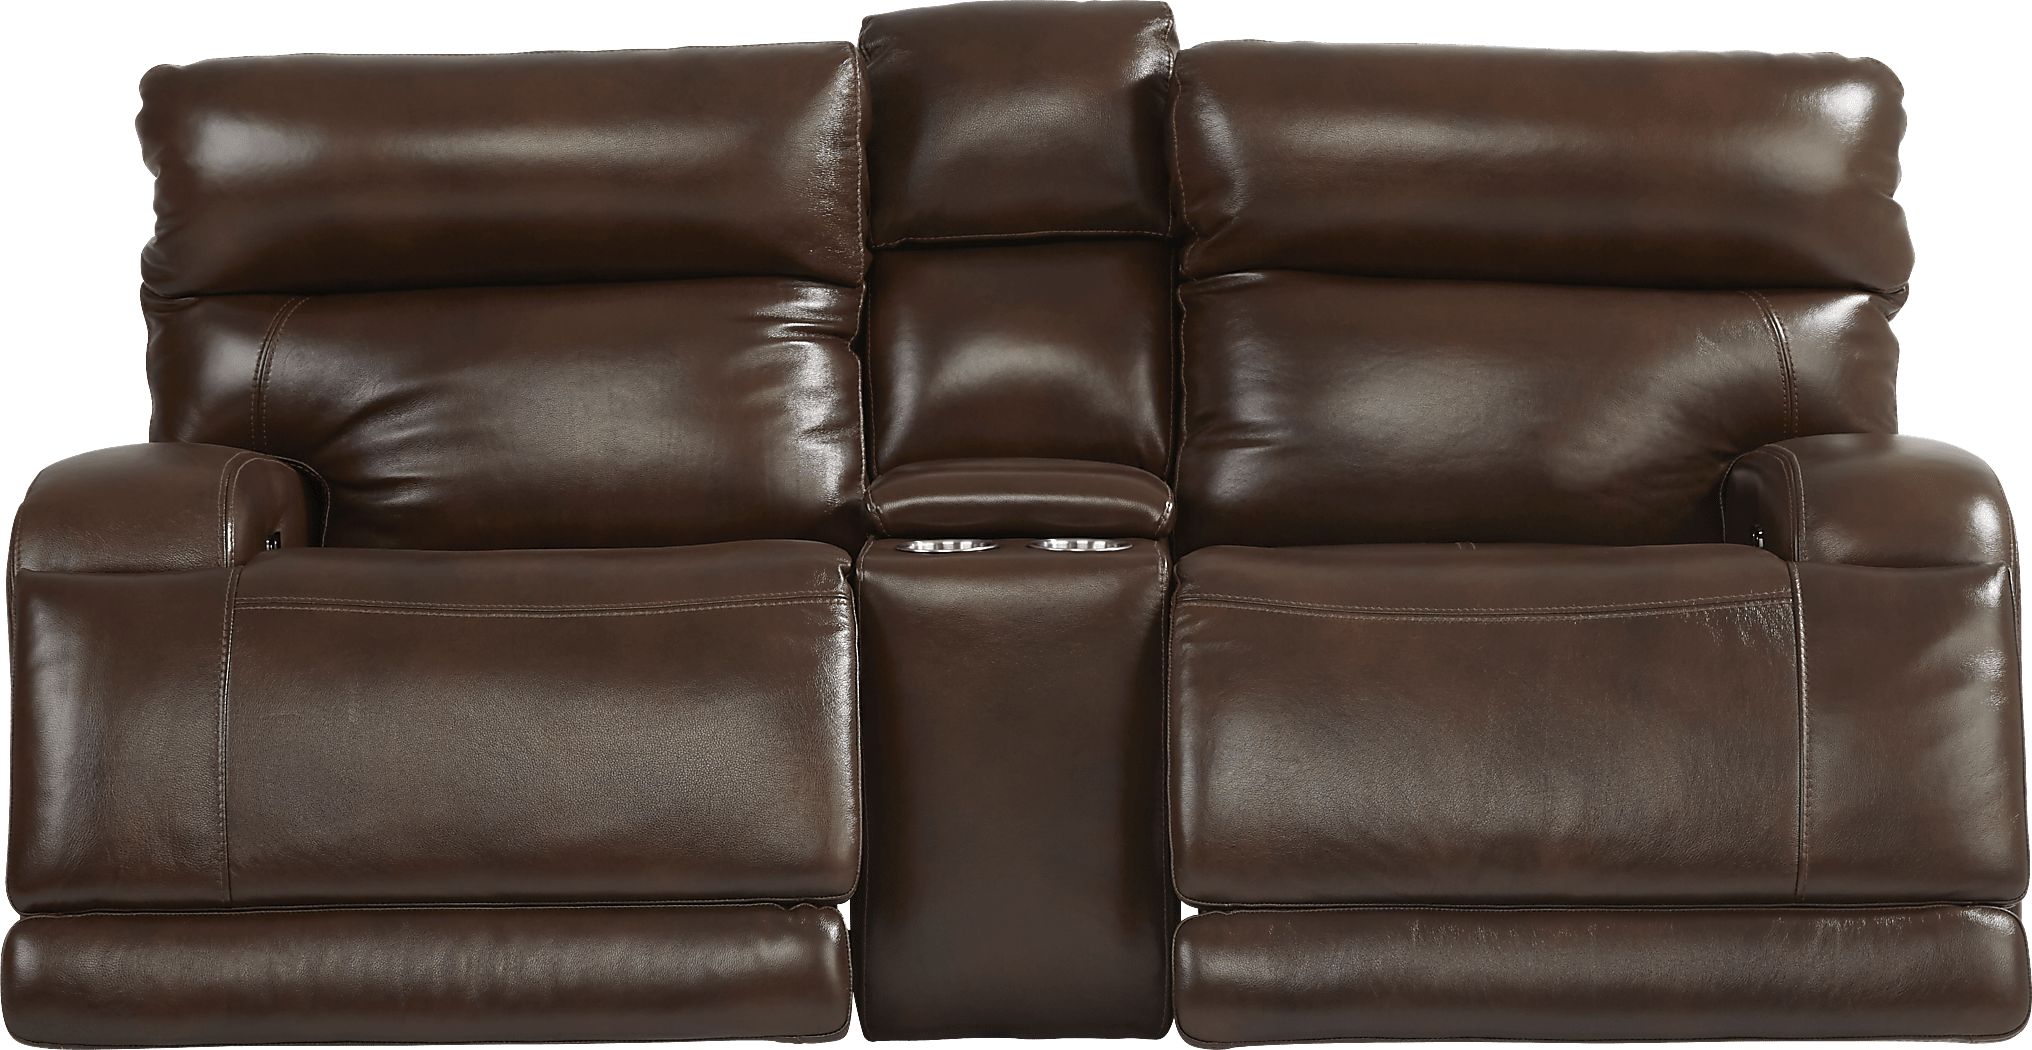 Burgio Brown Leather 5 Pc Reclining Living Room